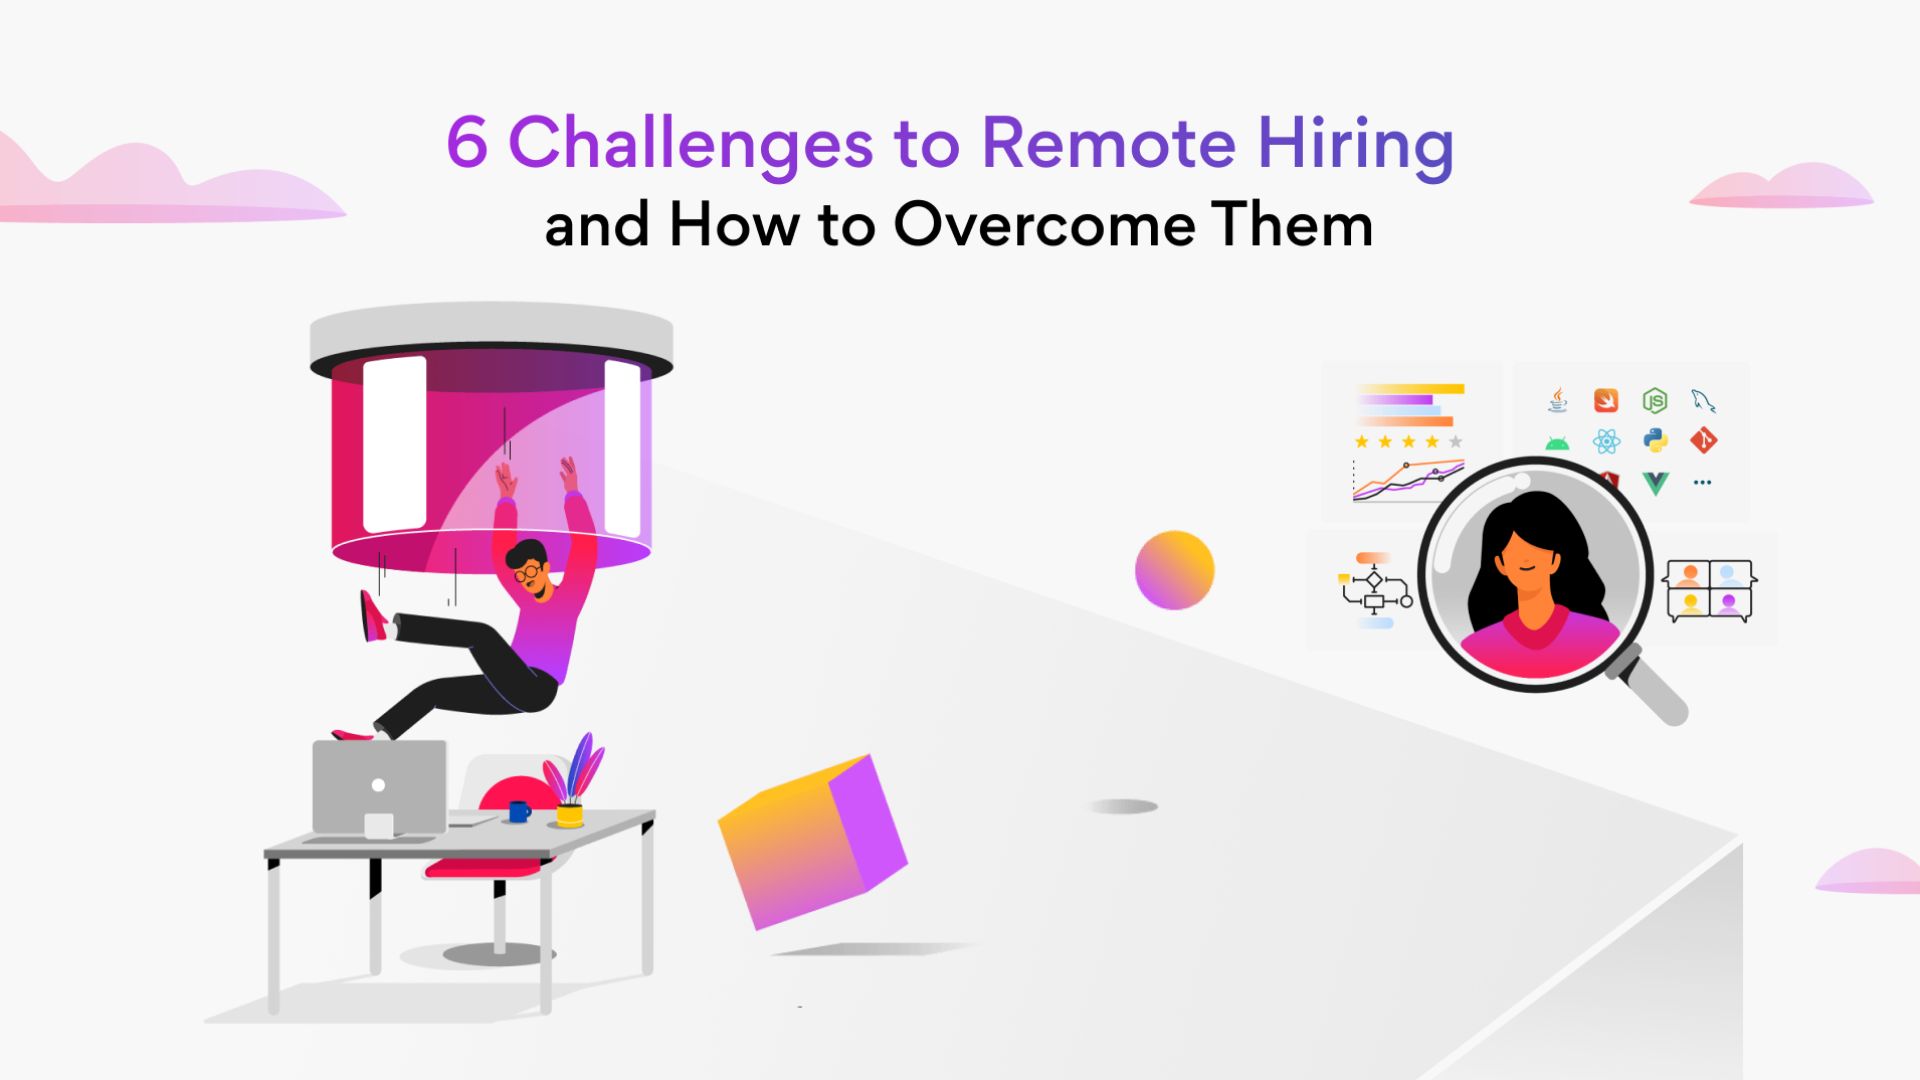 Challenges to remote hiring